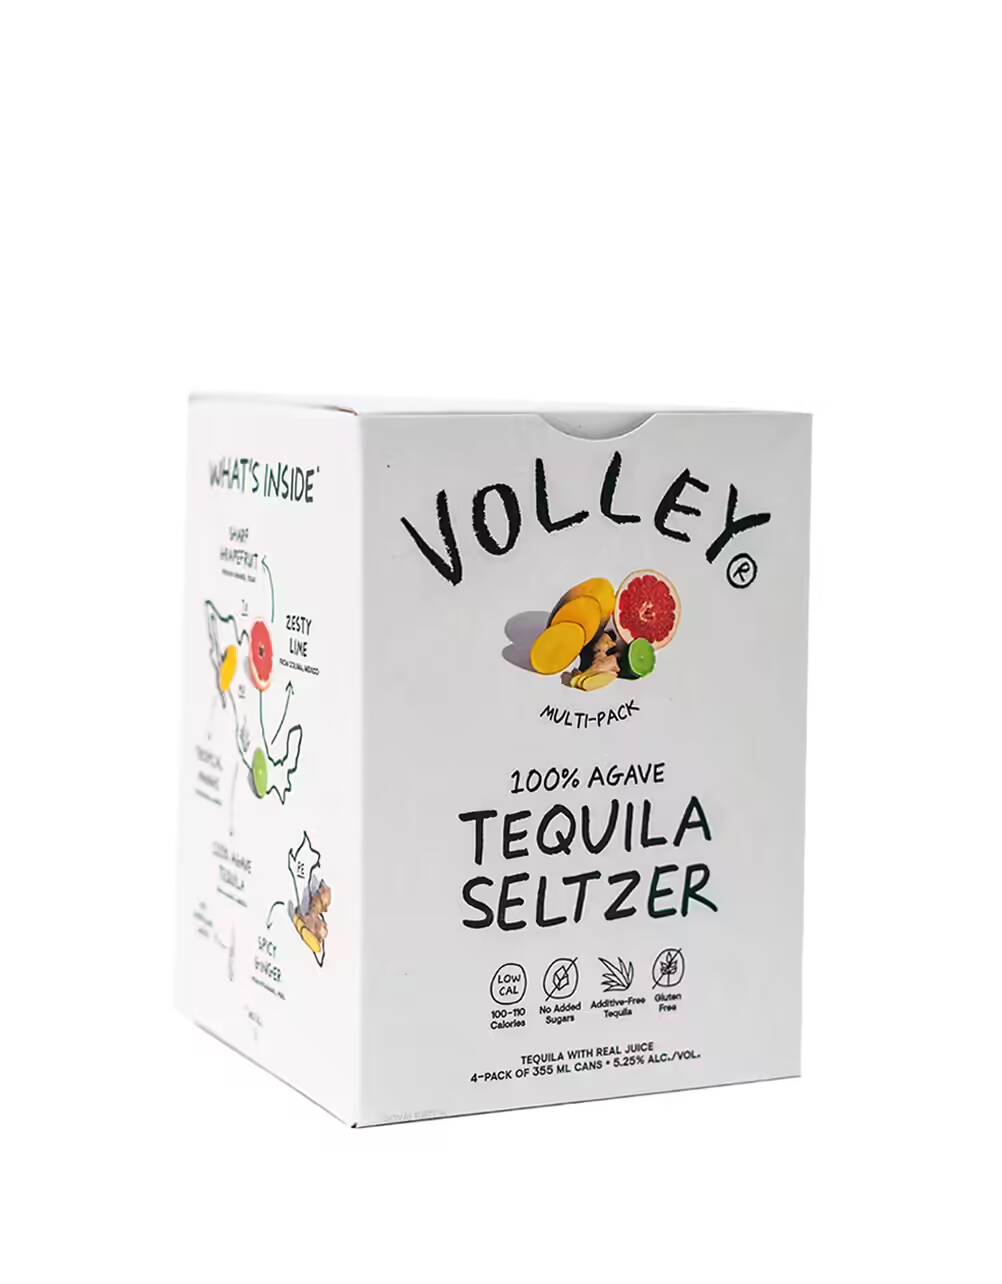 Volley Multi pack Canned Cocktails (4 Pack) 355ml